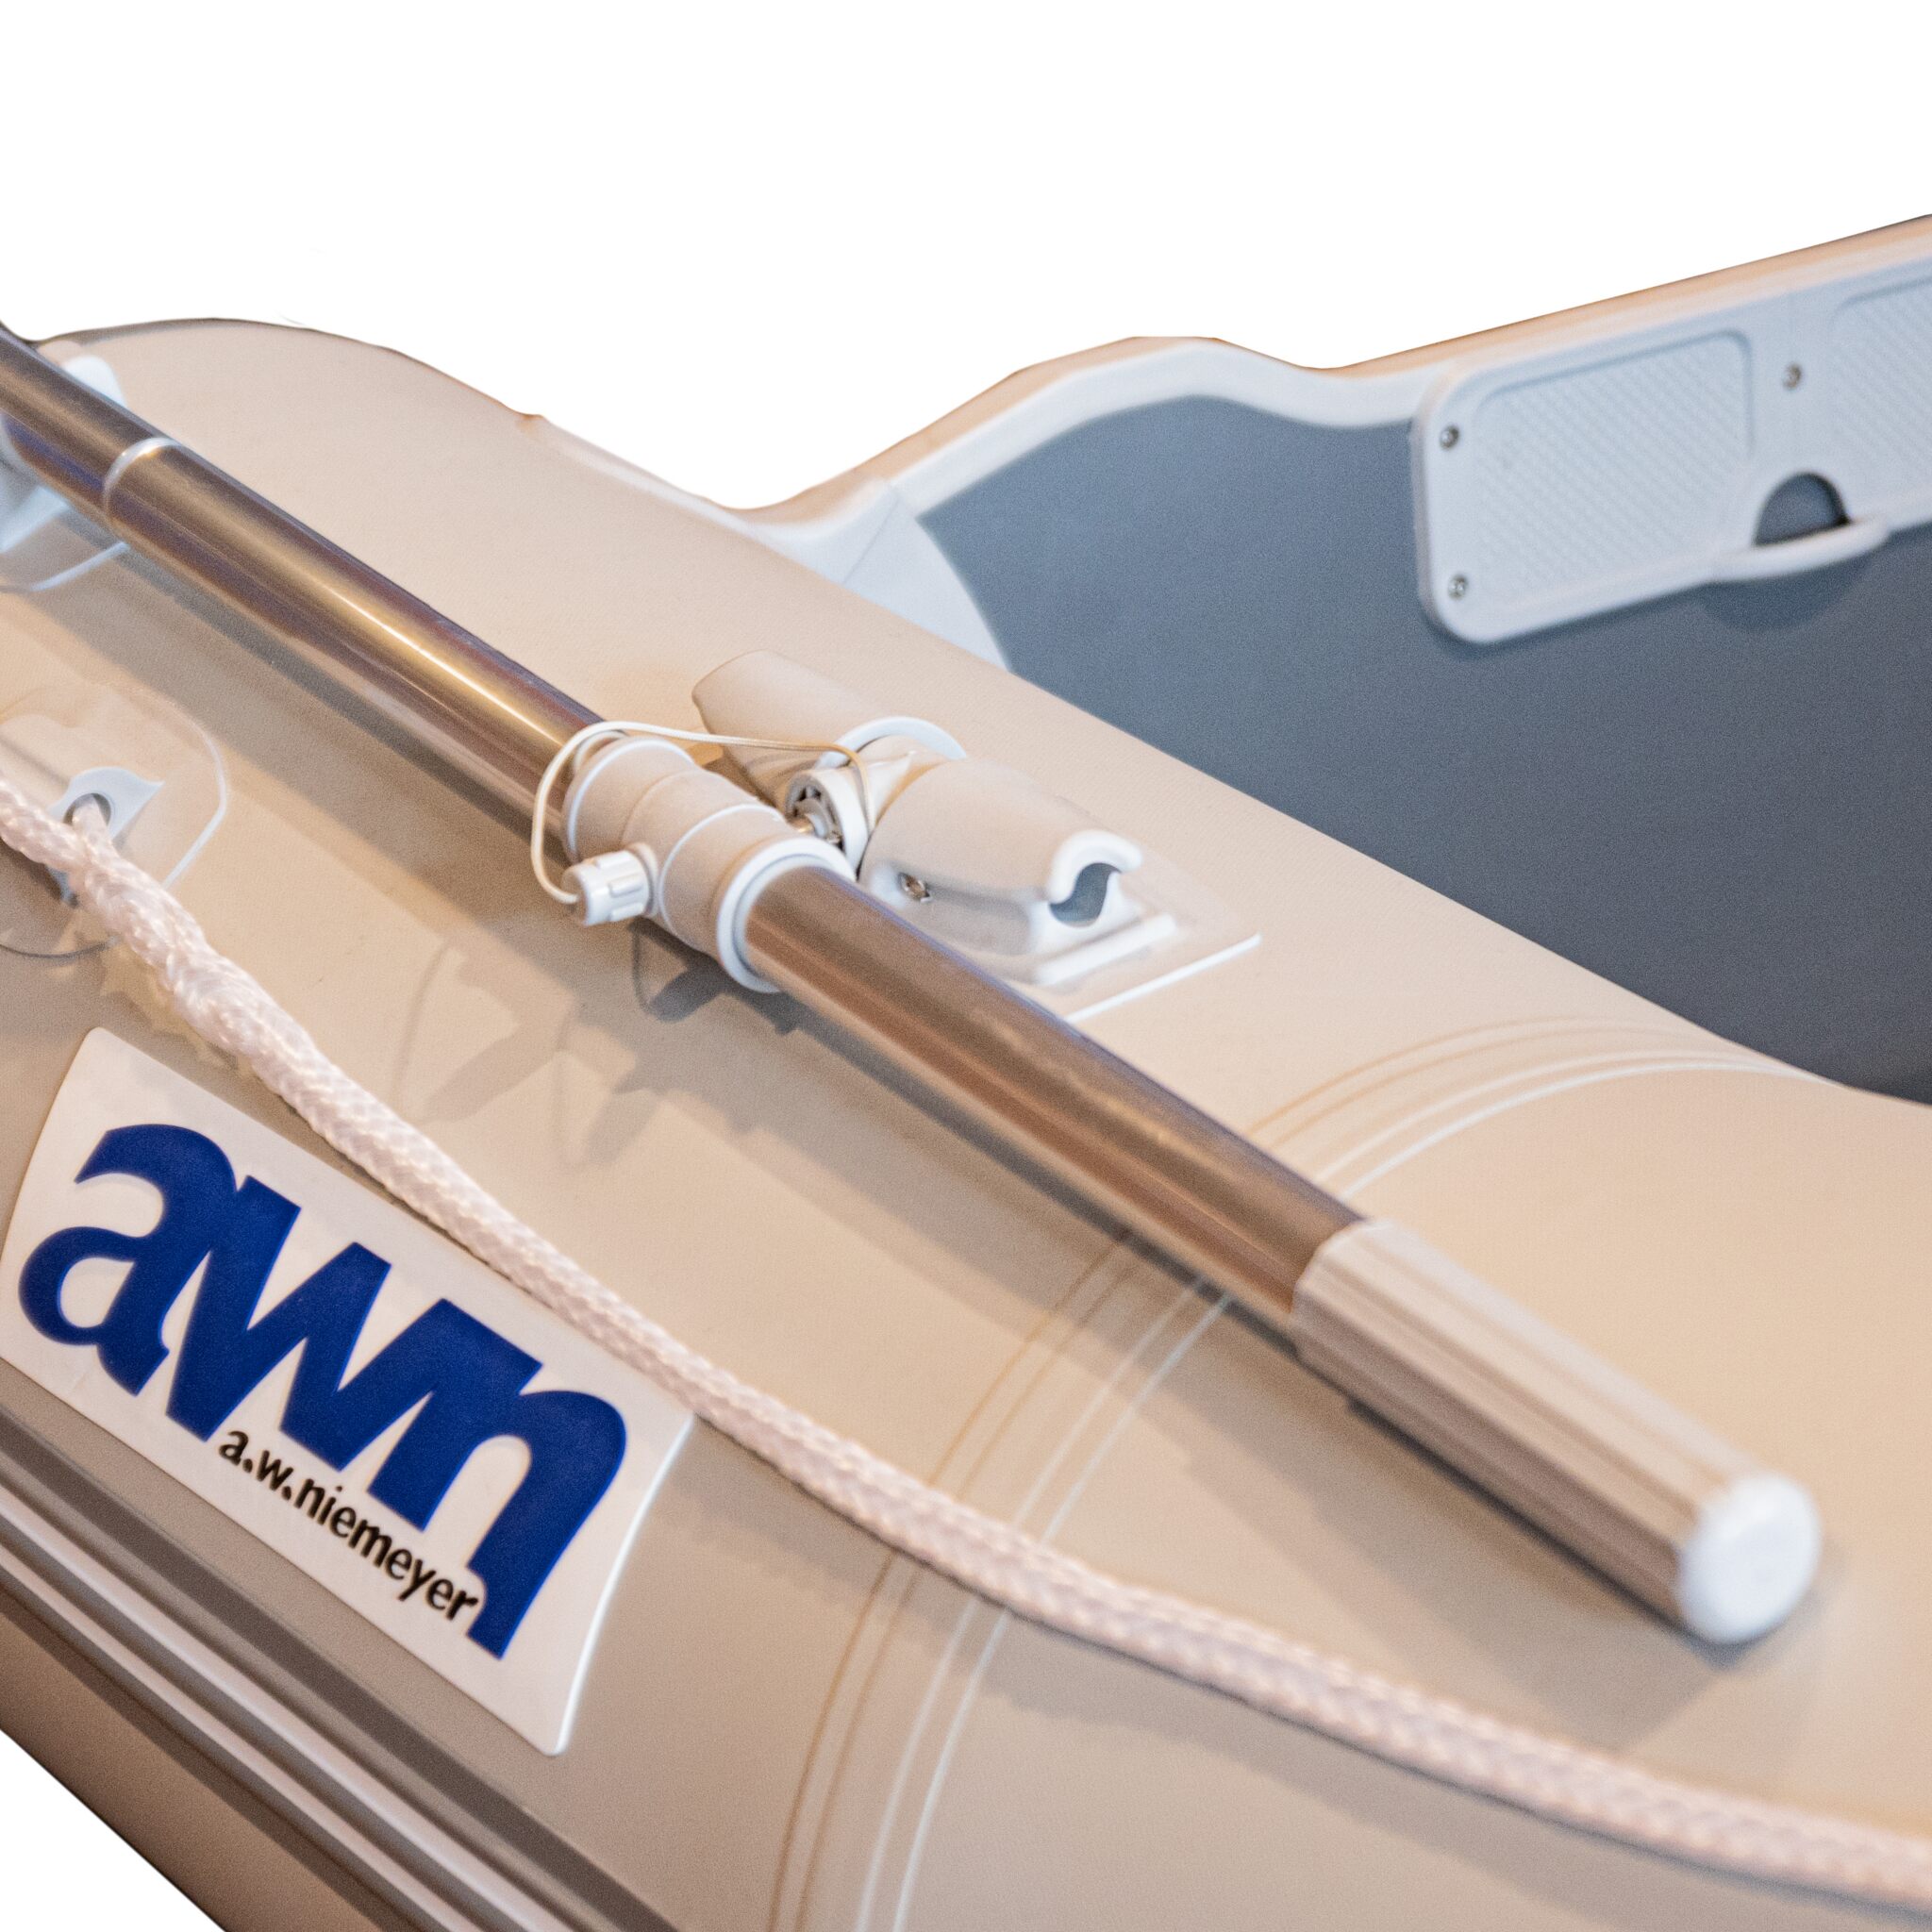 awn inflatable boat Family-Line | Facelift 2022